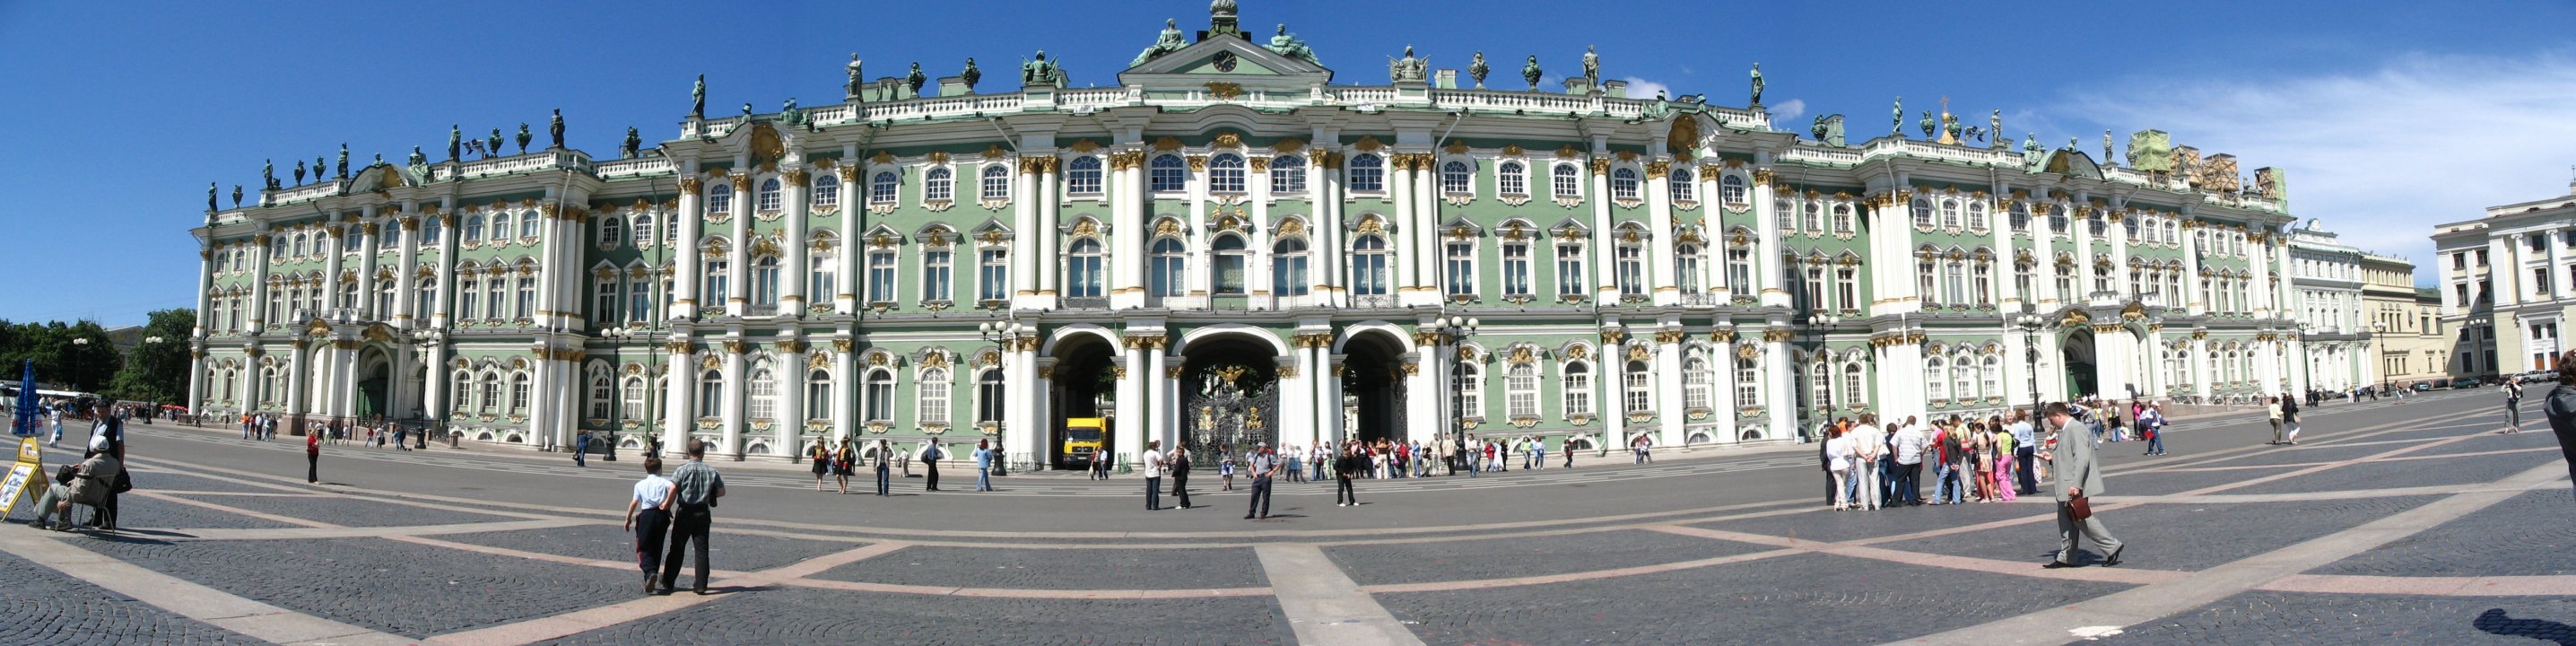 The 250th Anniversary of the State Hermitage Museum